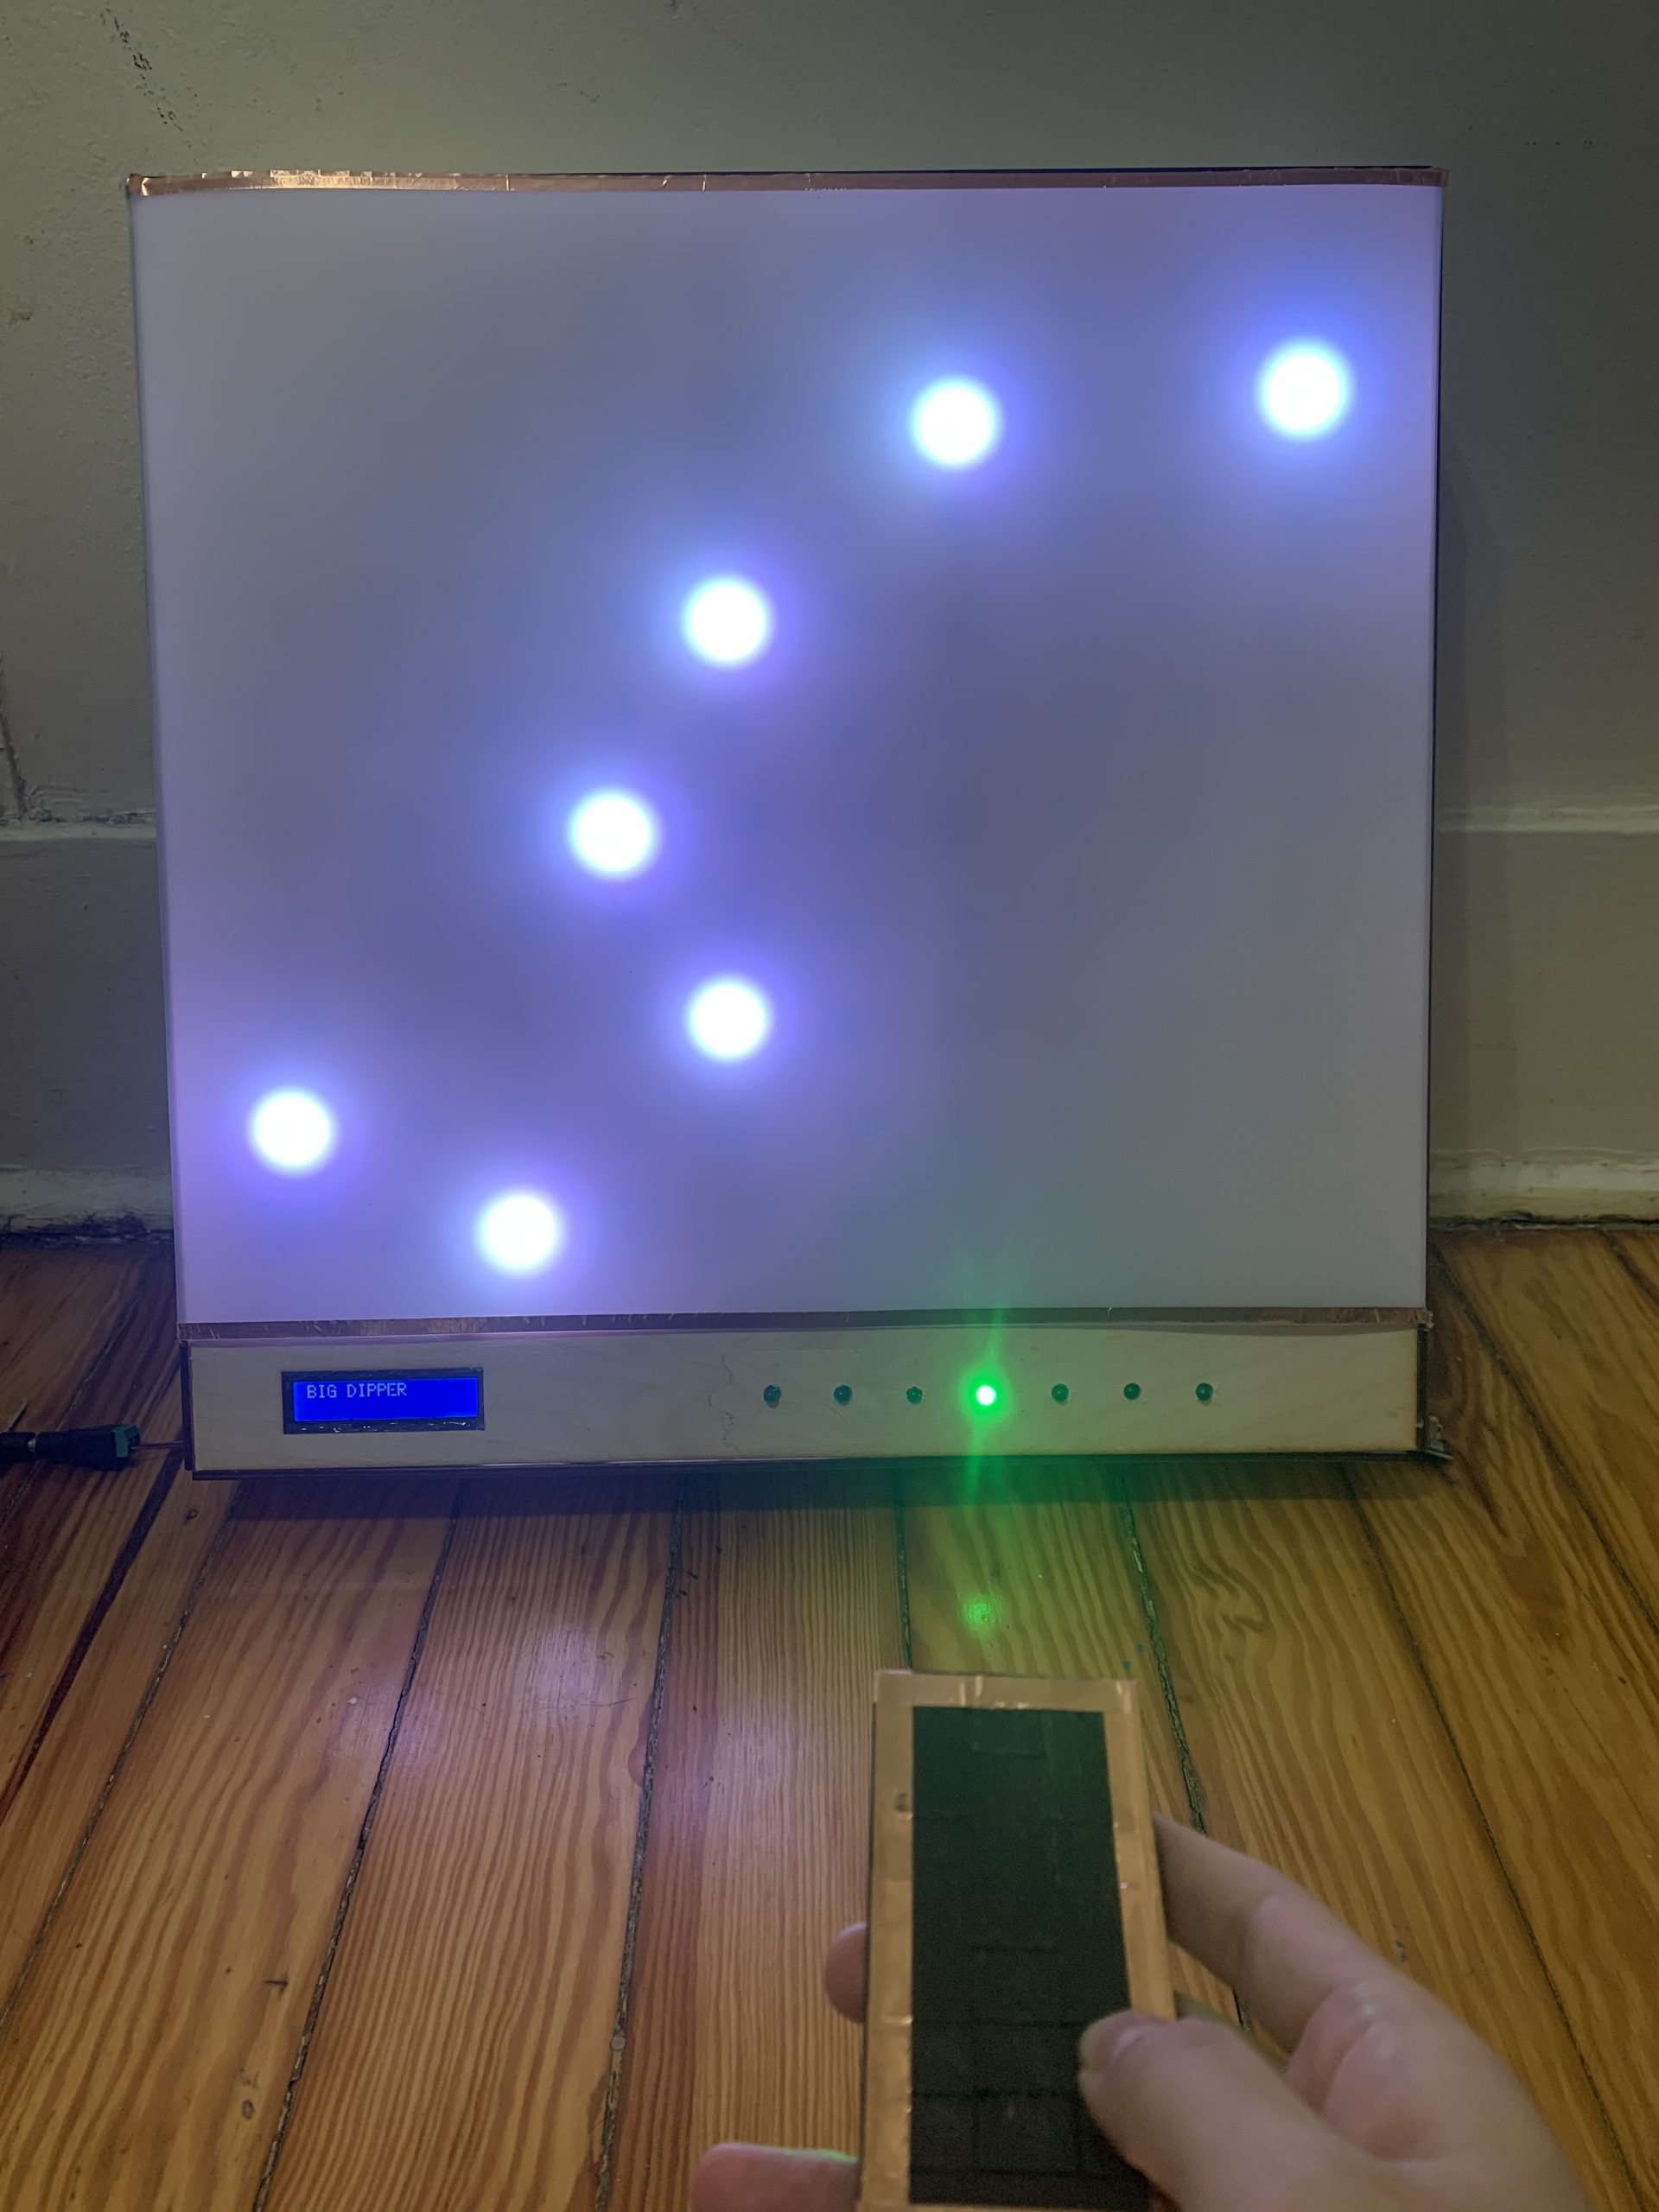 Photograph of a white translucent sheet of paper above a wooden-framed box with an LCD display and some illuminated green LEDs. Behind the sheet are seven white circles of light arranged like the Big Dipper constellation. In the foreground, a hand holds a small black-covered remote control.